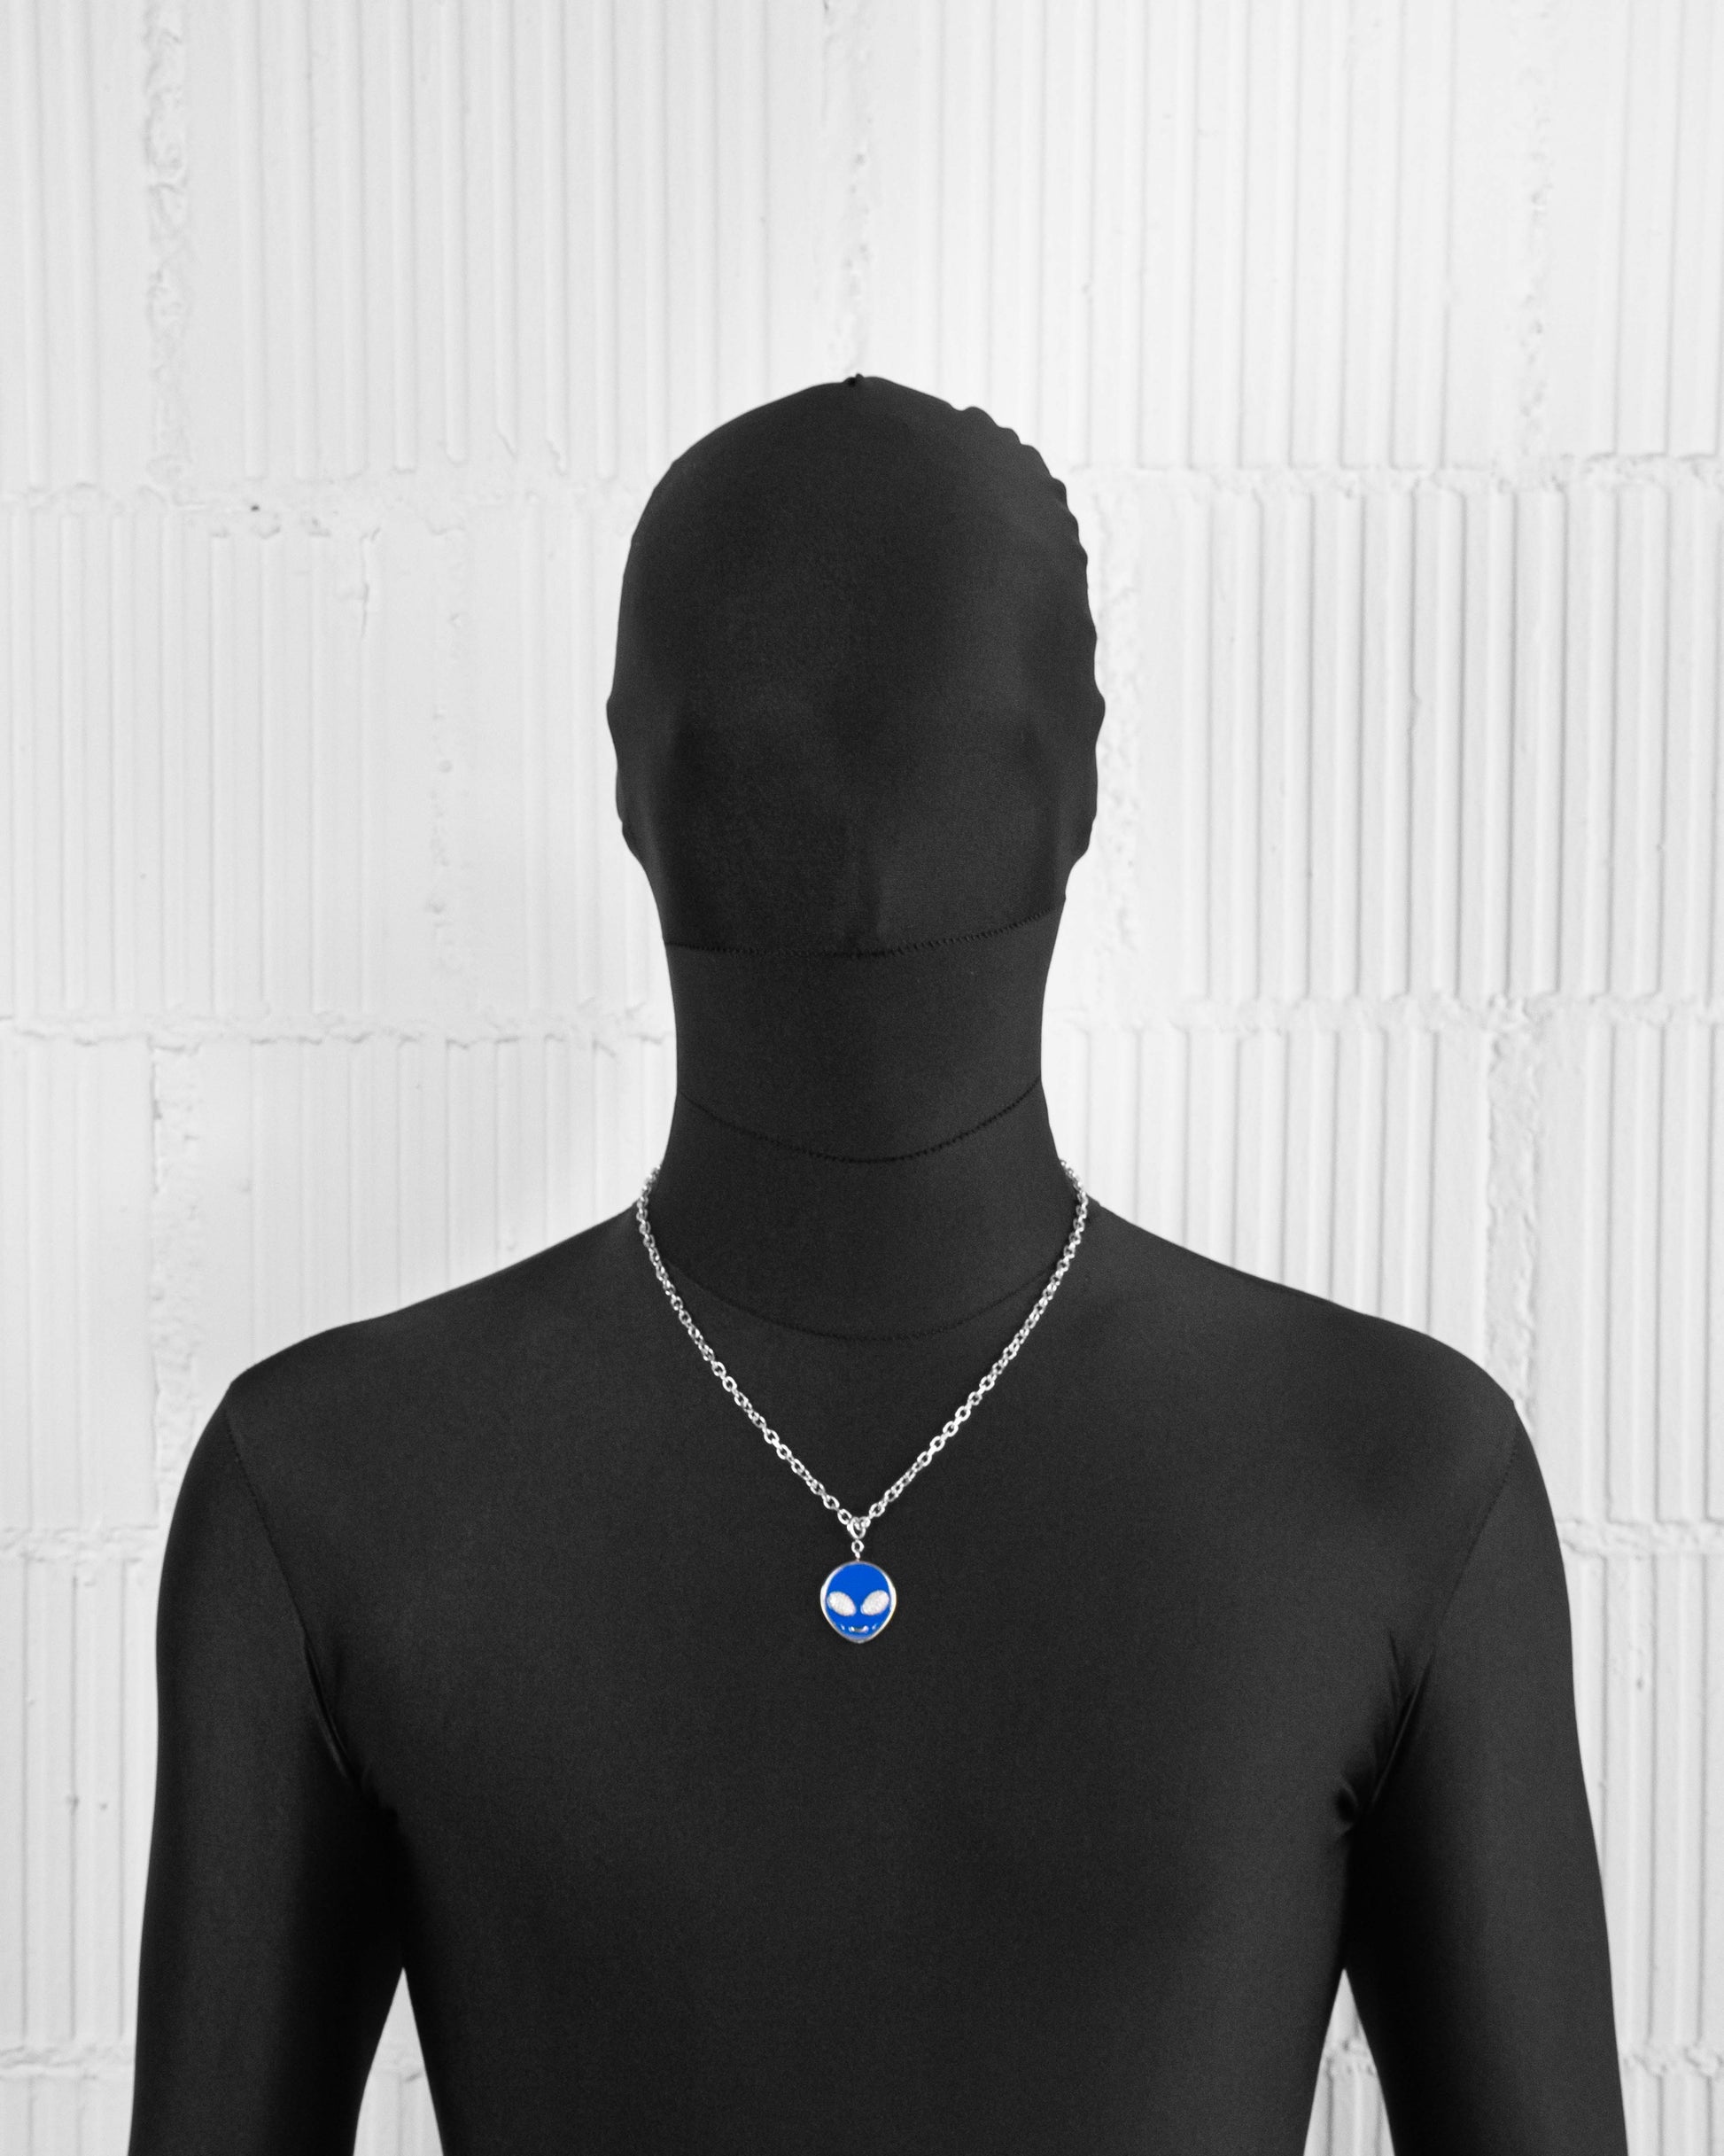 man with black suit wearing 18k white gold coated alien pendant necklace with hand-set micropavé stones in white on blue hand painted glow in the dark alien pendant and 3mm rolo chain